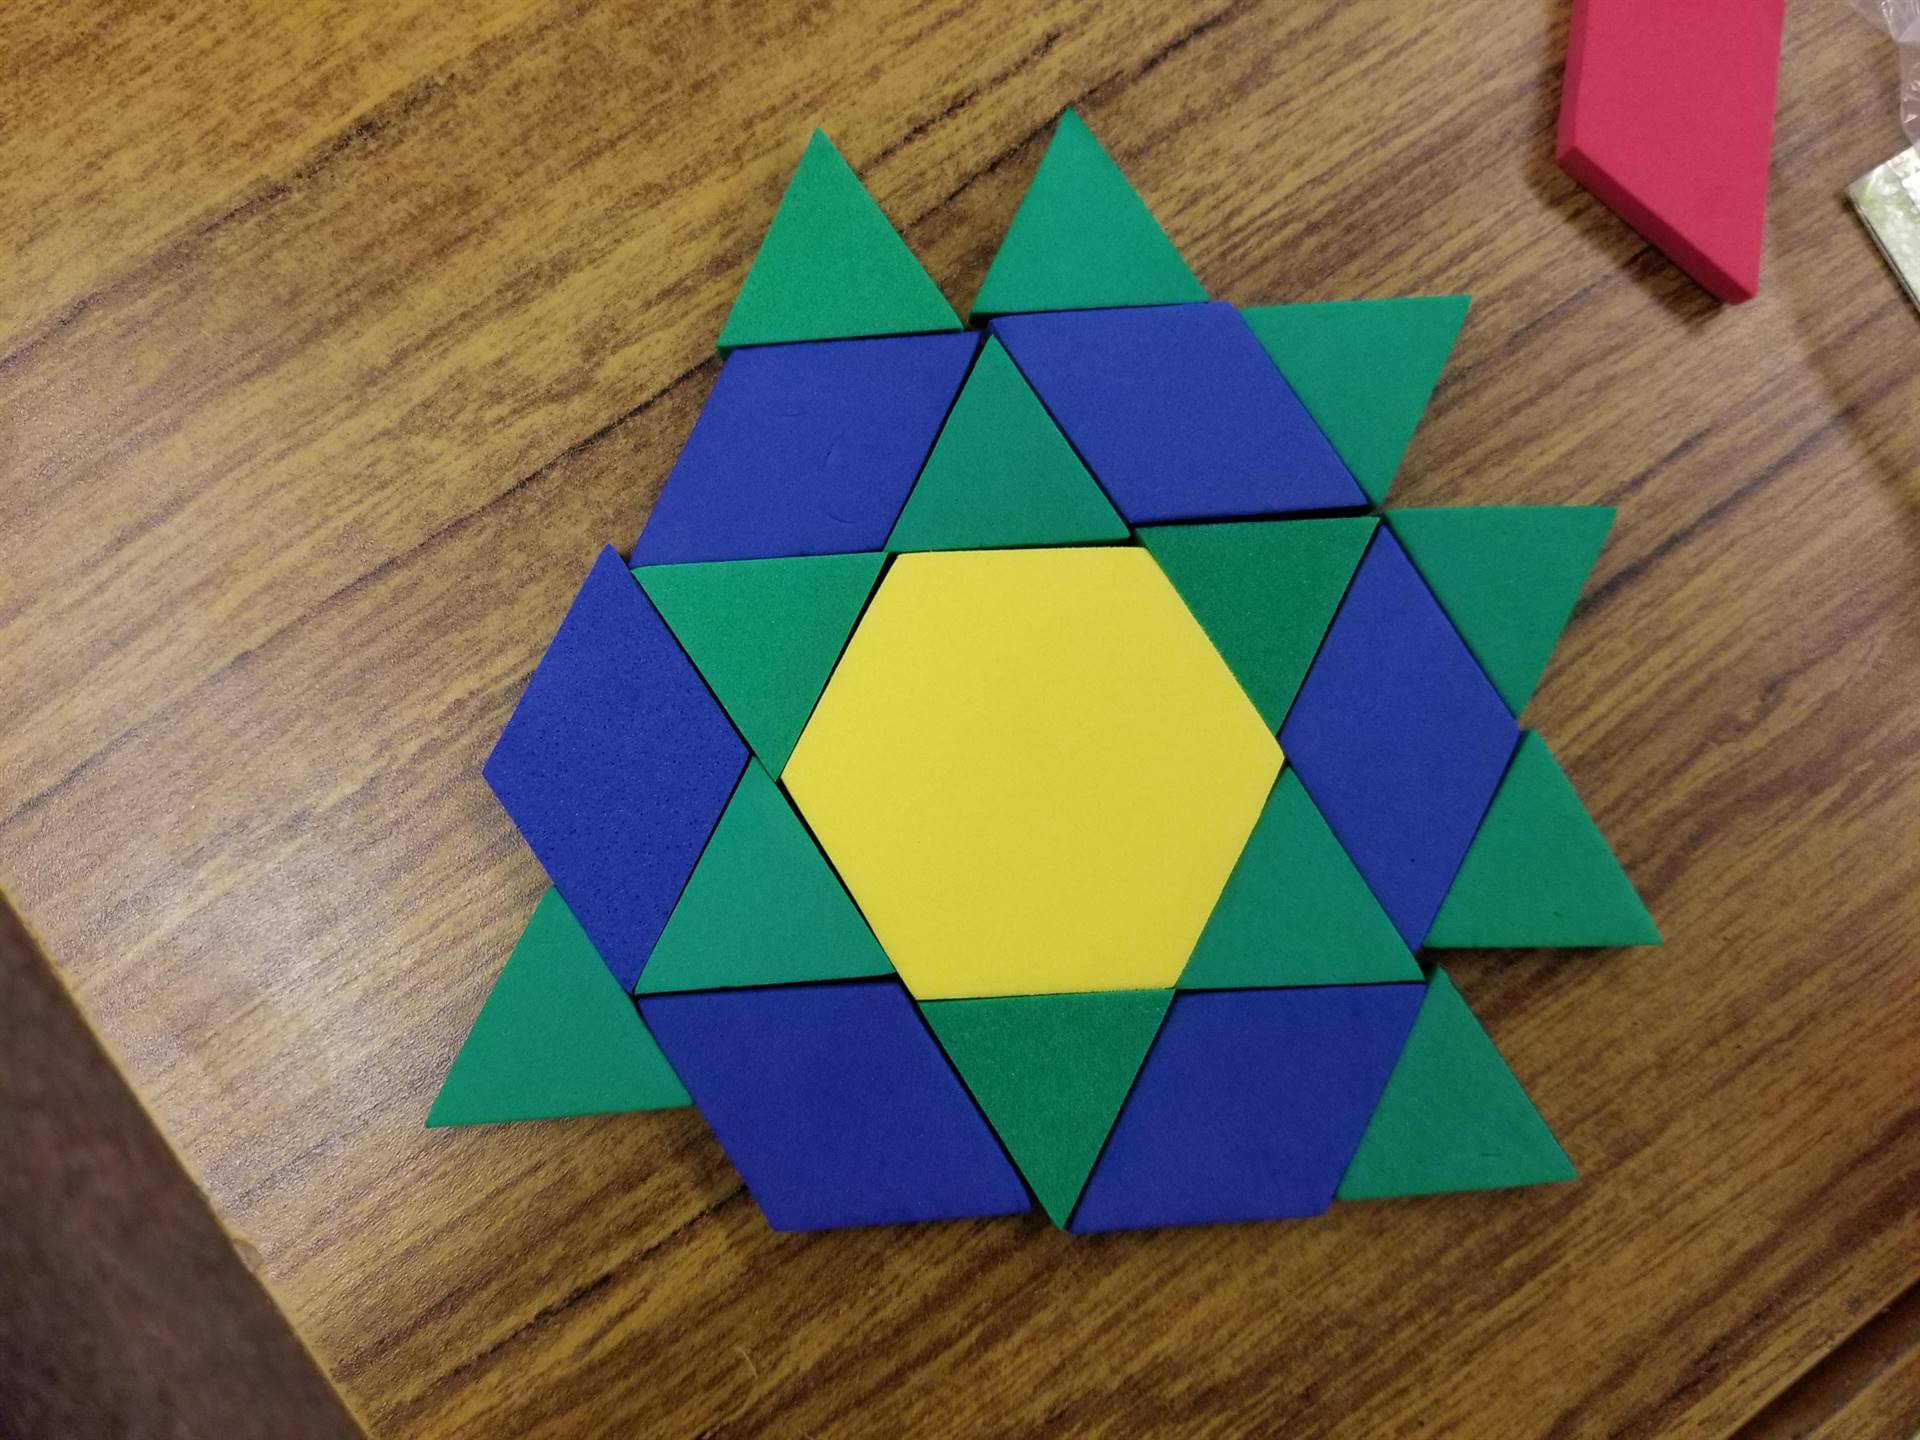 Math project with tile.